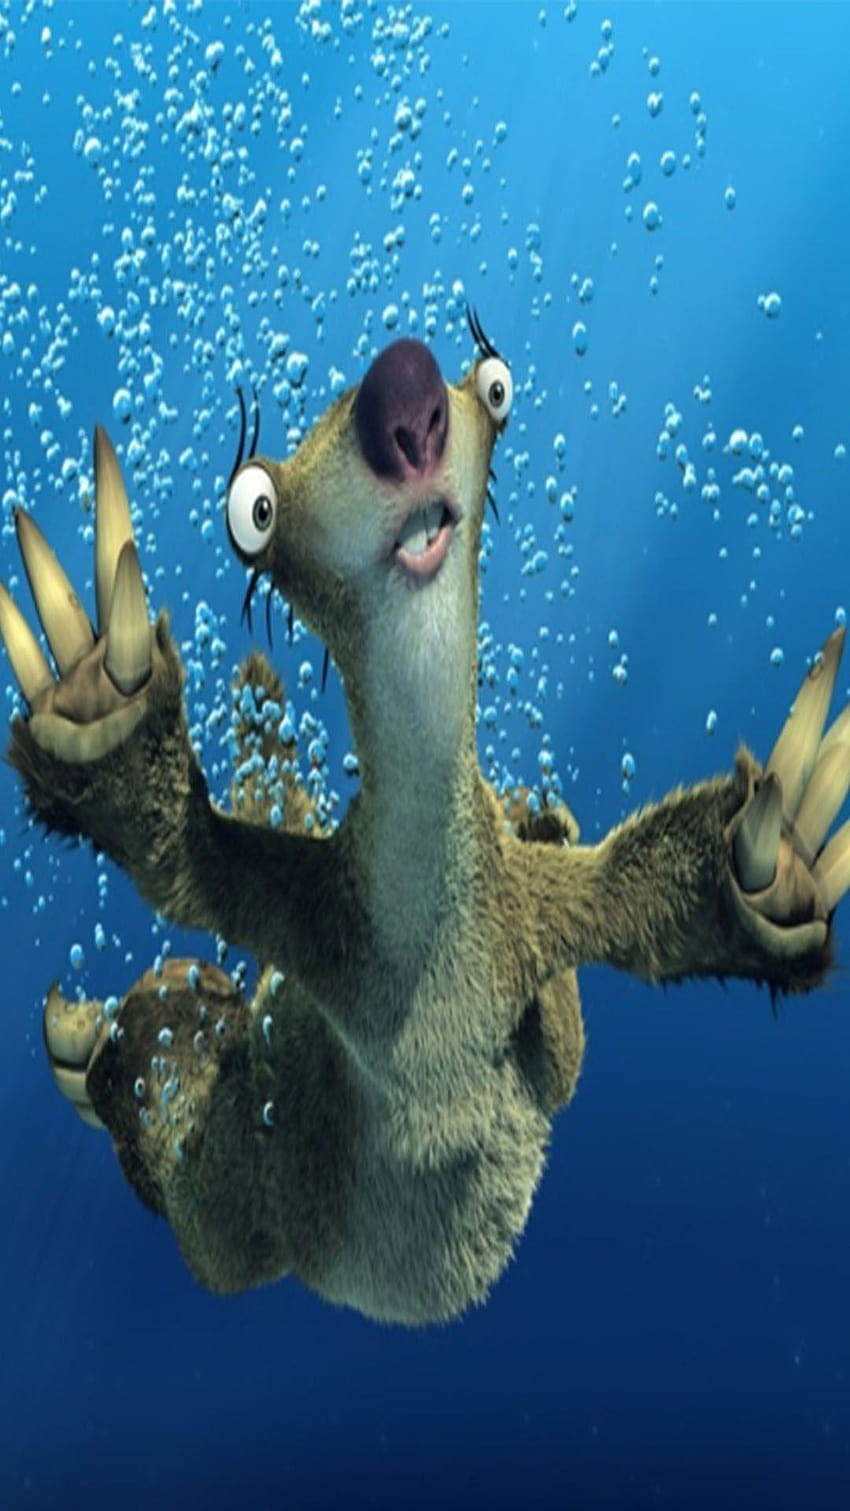 1920x1080px 1080p Free Download Ice Age Sid Posted By Christopher Tremblay Sid The Sloth Hd